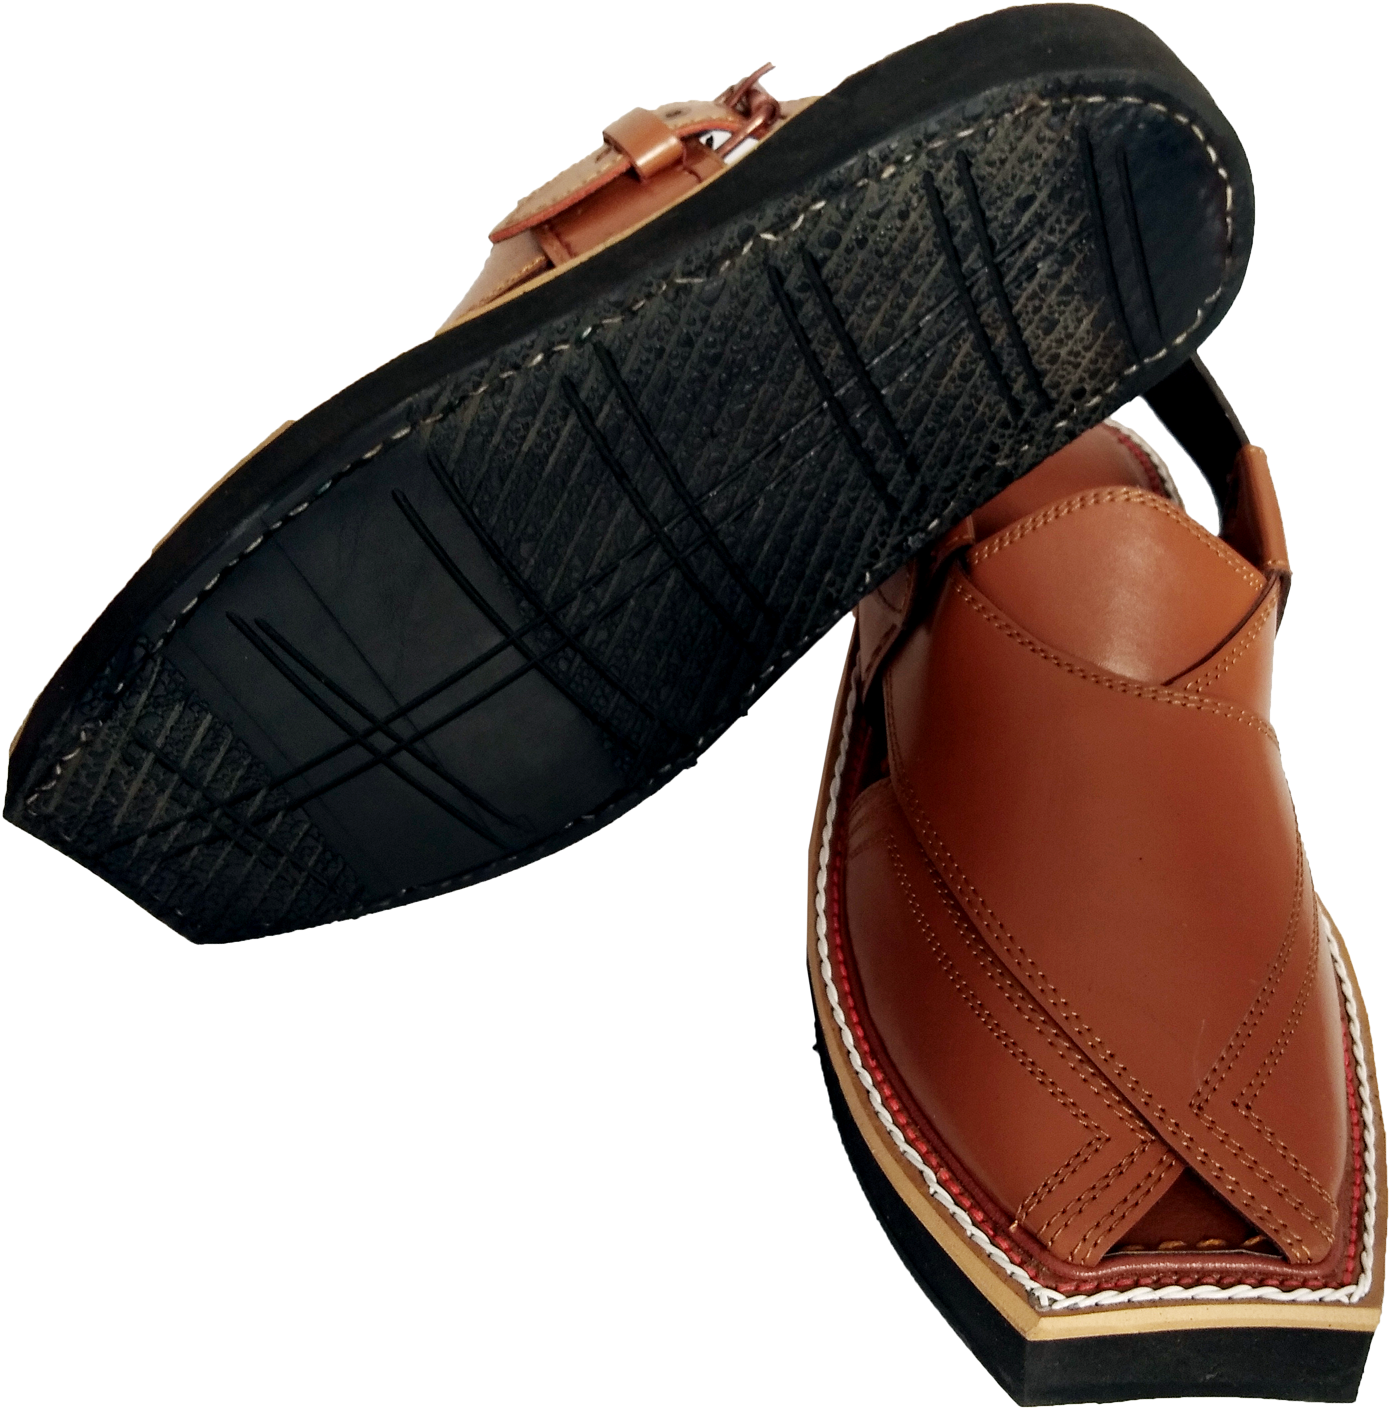 Brown Leather Sandal Isolated PNG image